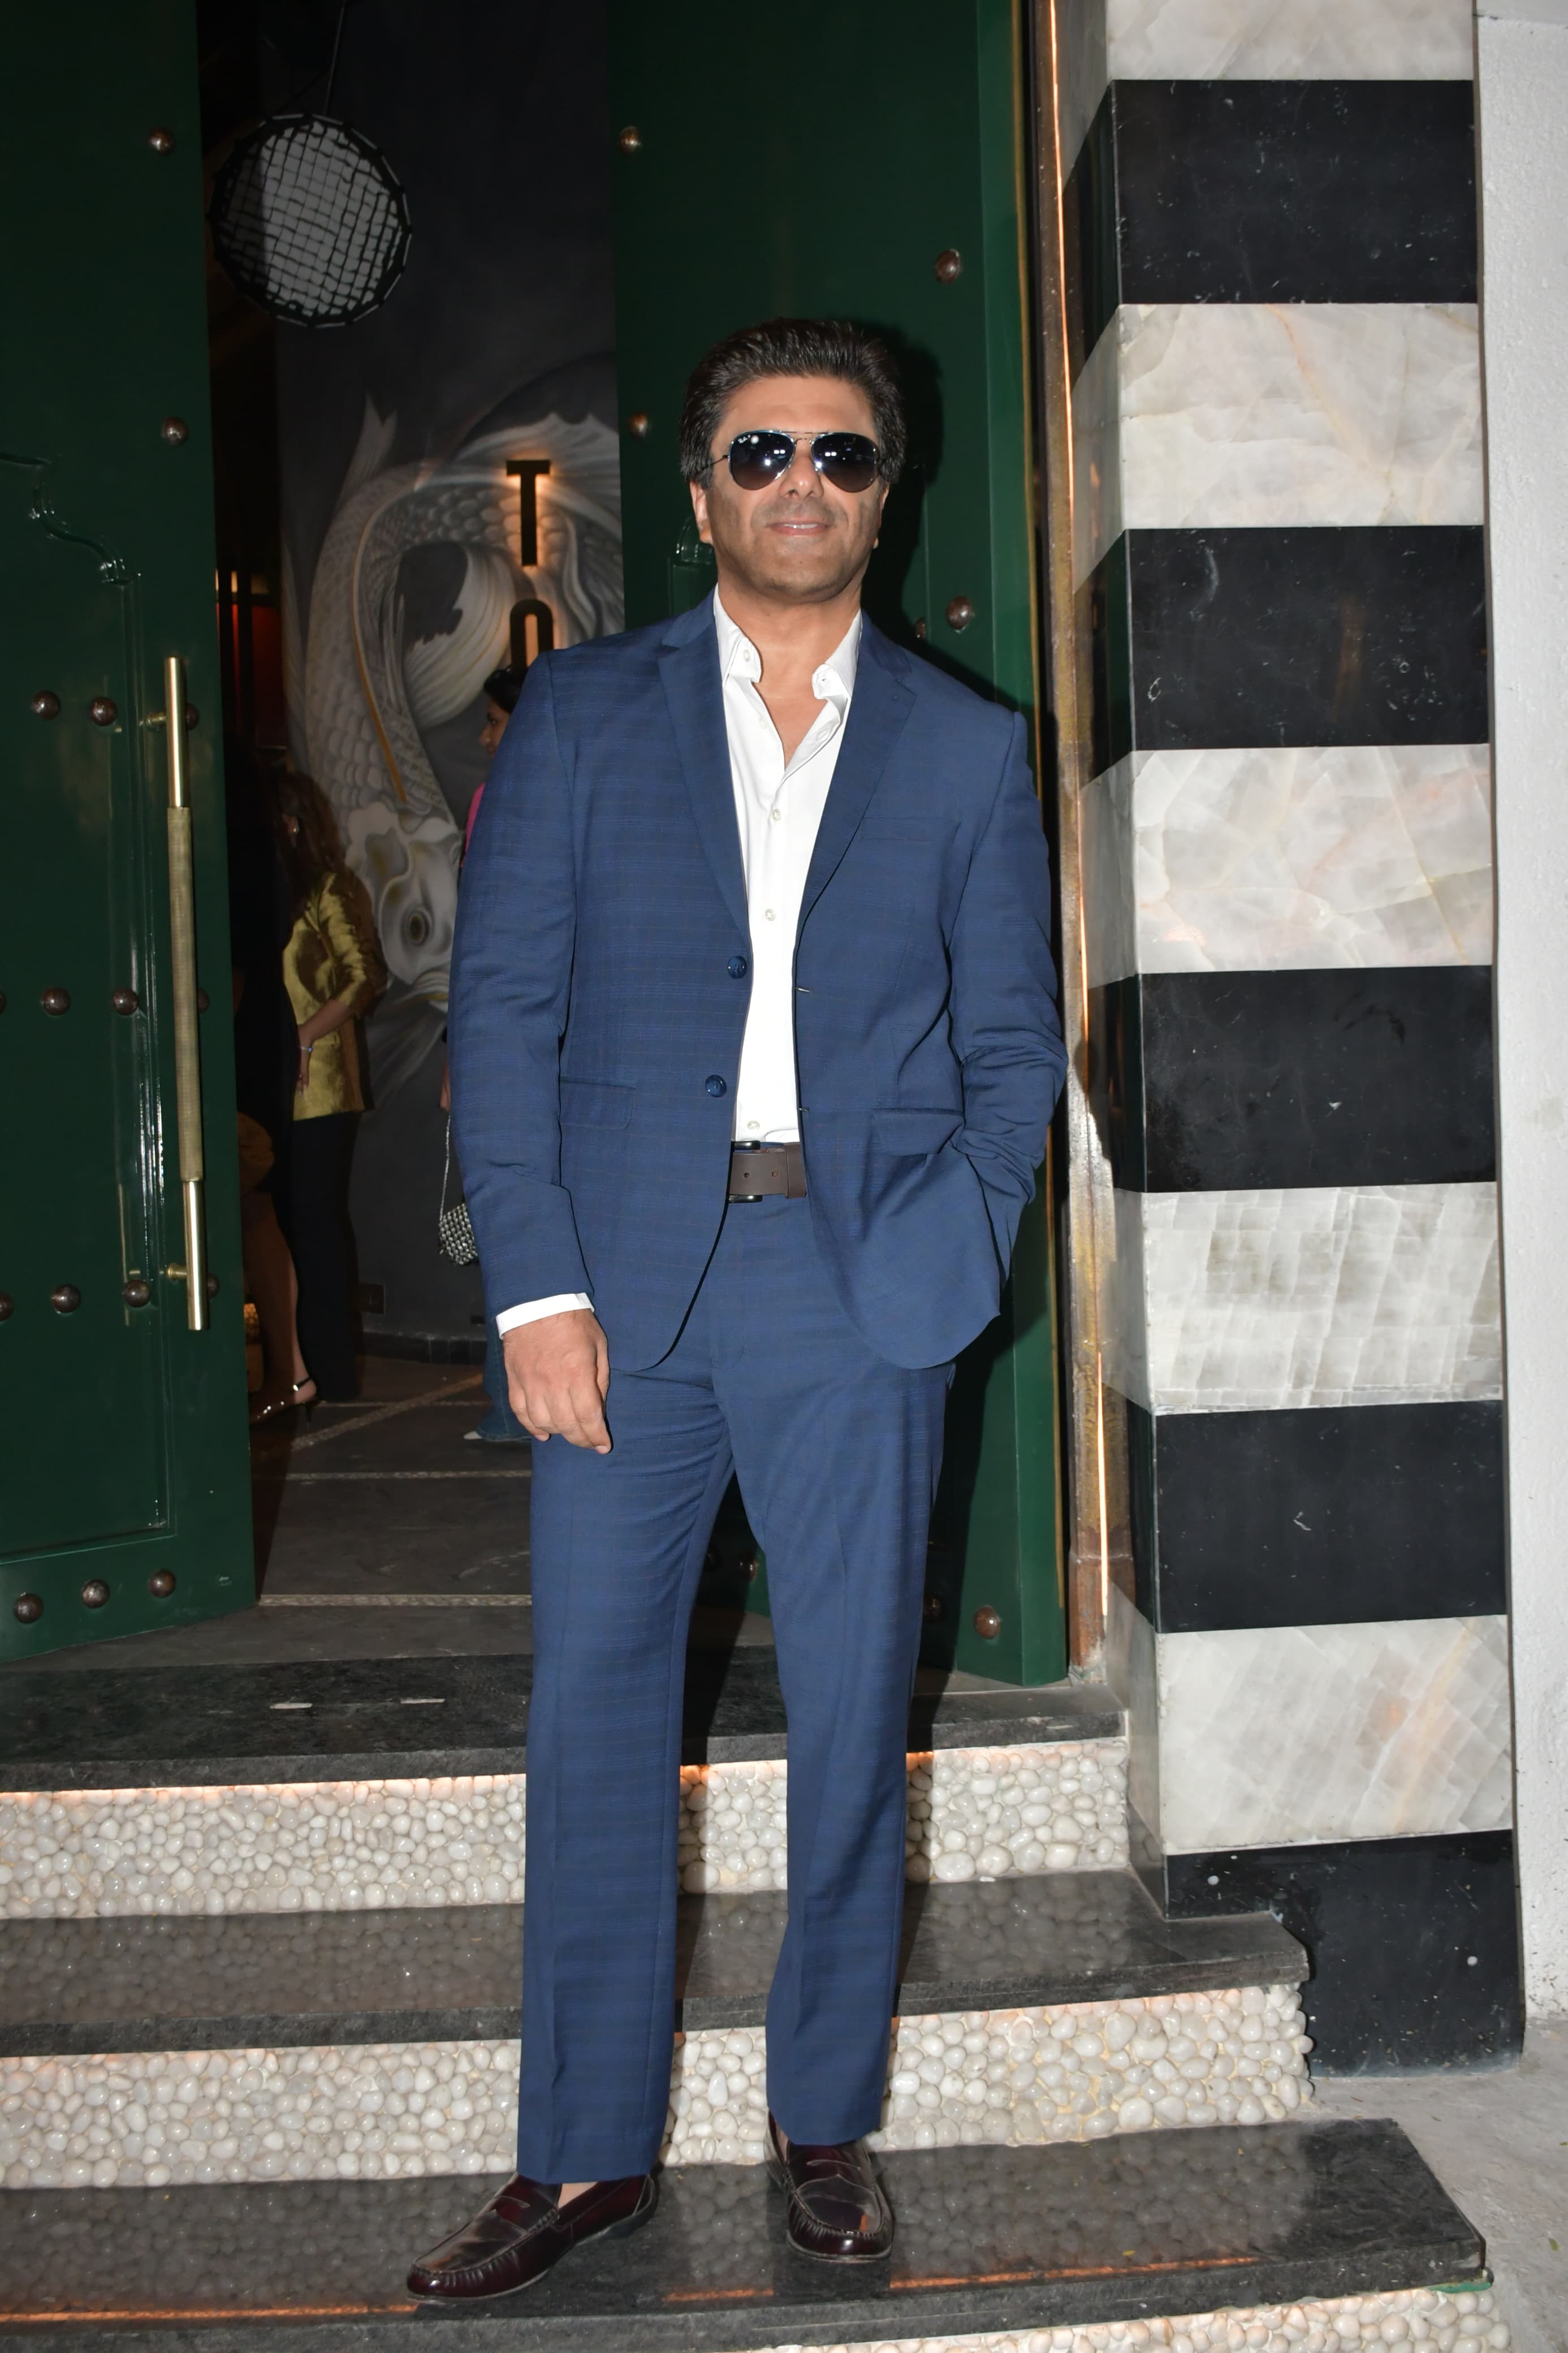 Samir Soni was also present at the intimate launch event. The actor looked dashing in a stylish three-piece suit